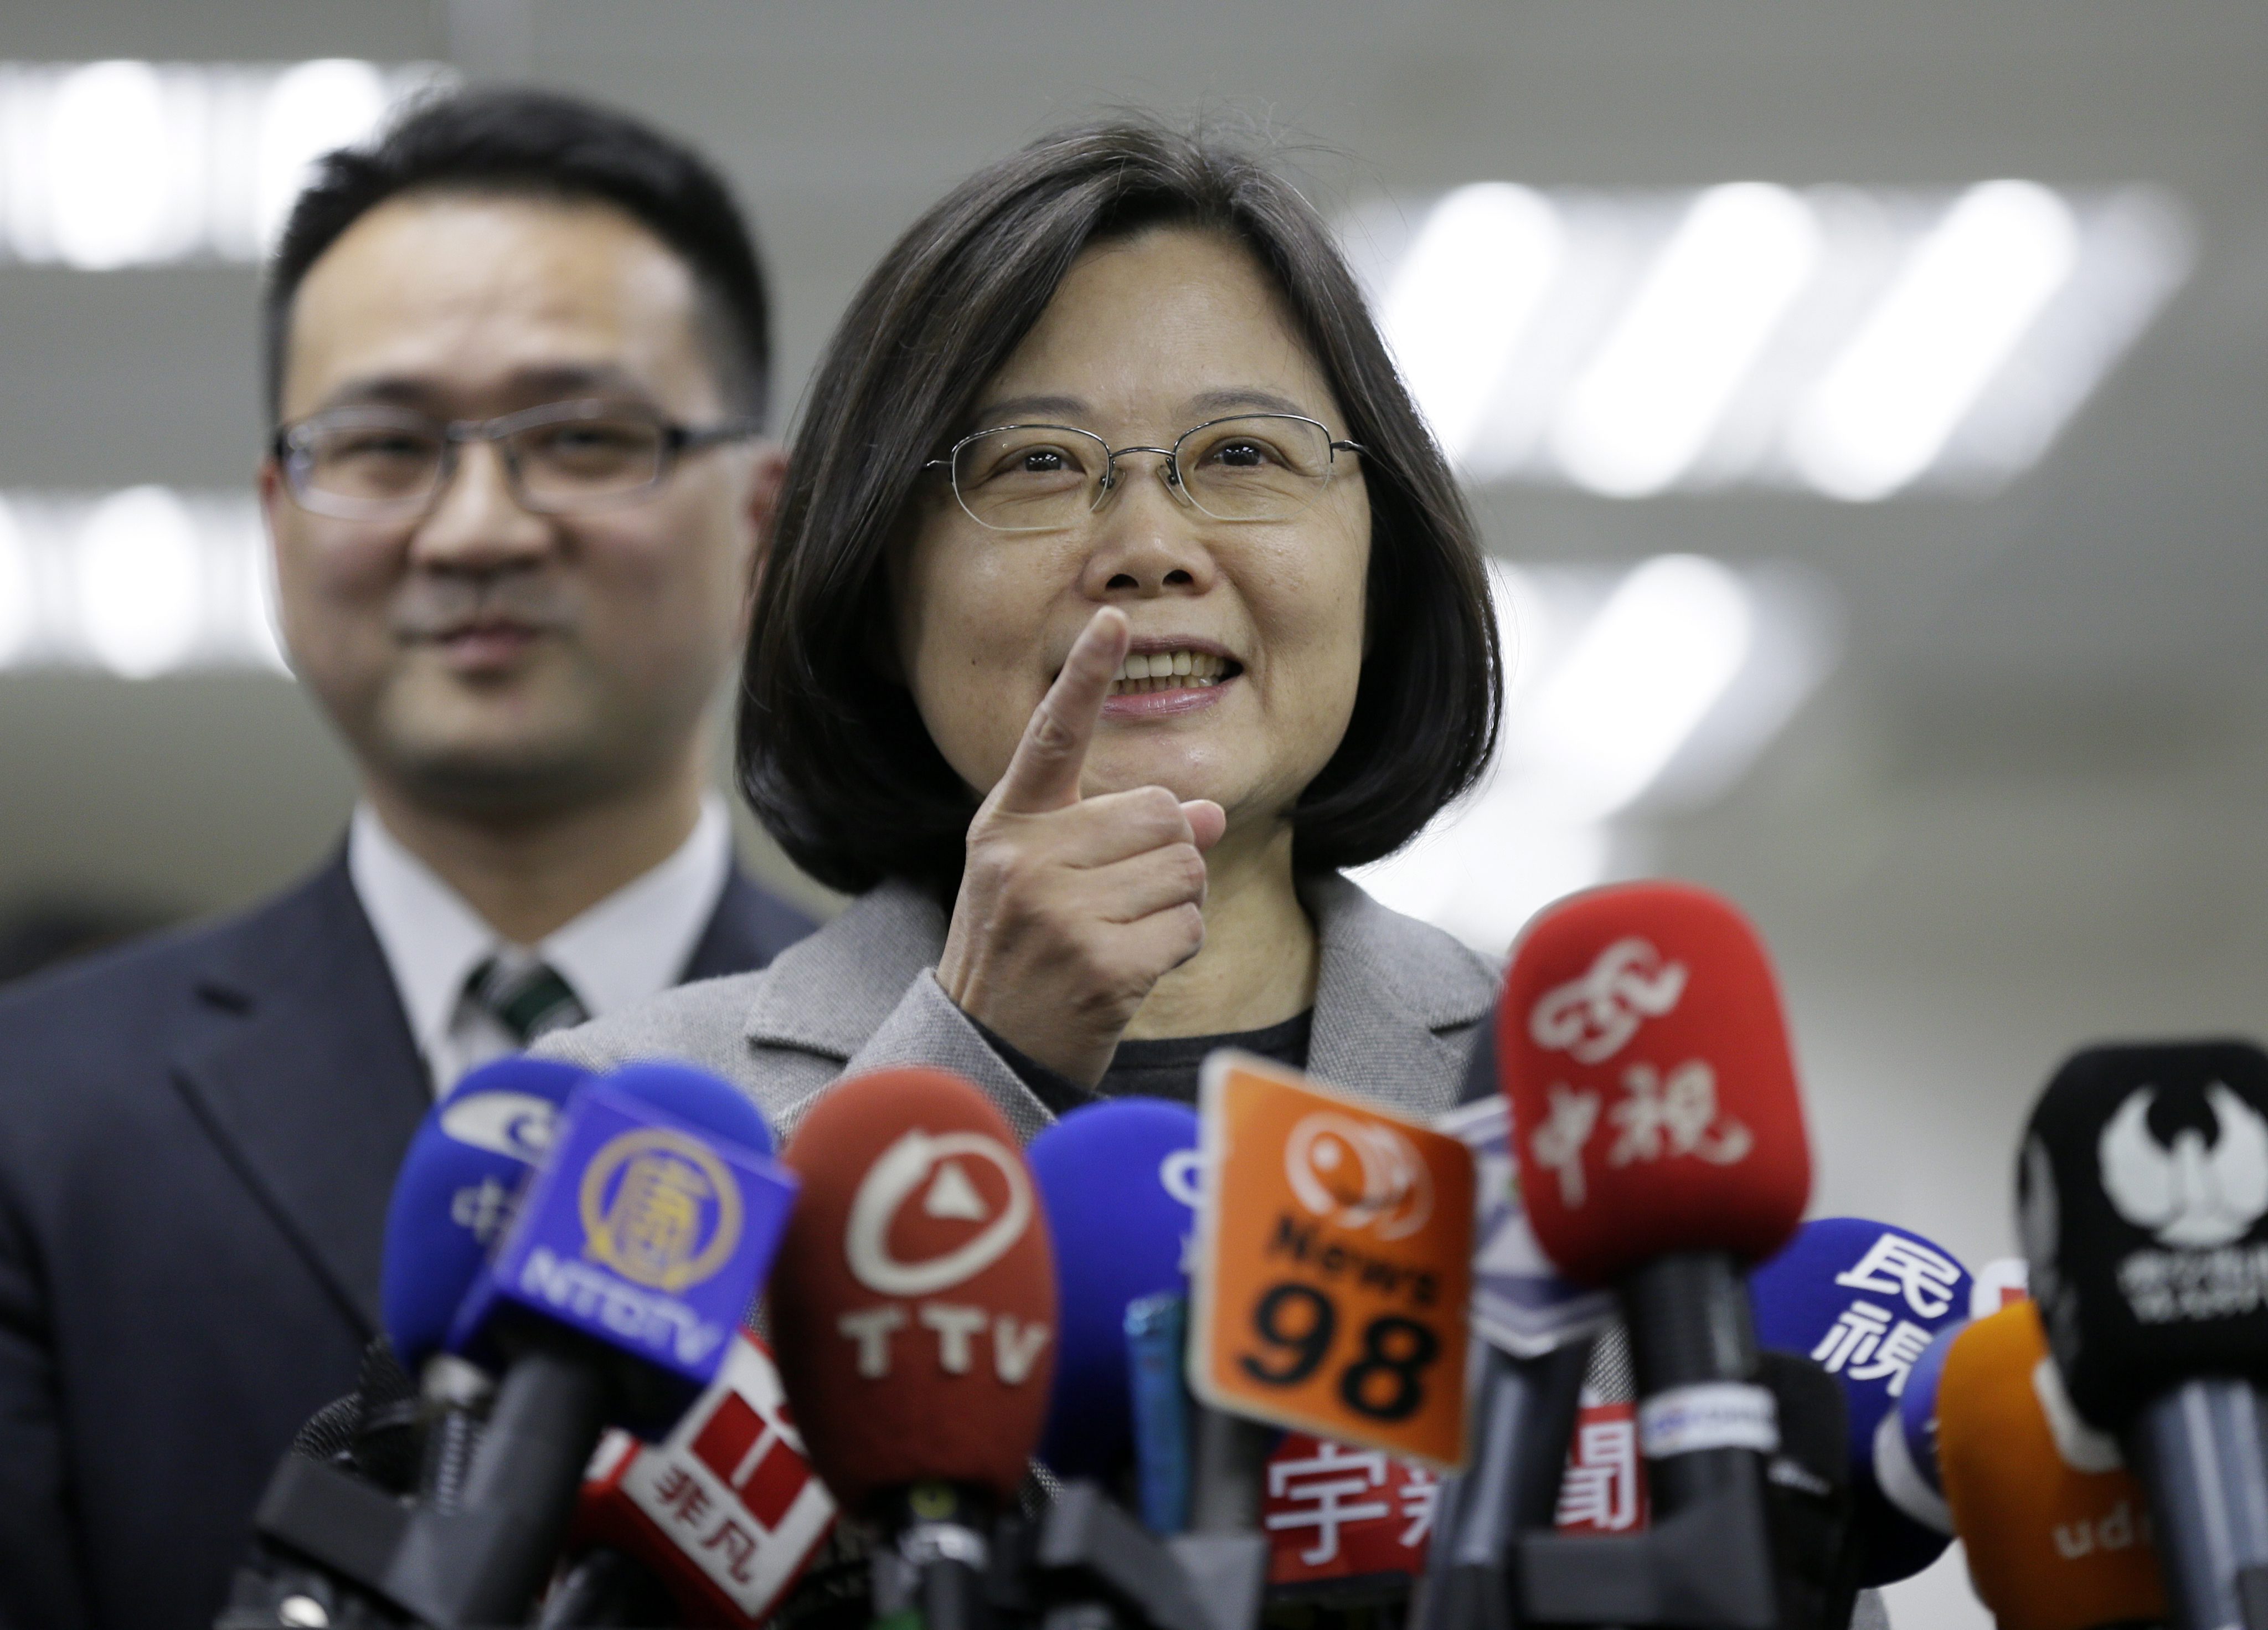 epa05112386 Taiwan opposition leader and president-elect Tsai Ing-wen gestures during an interview before their meeting for parliament reform in Taipei, Taiwan, 20 January 2016. Tsai, chairwoman of the Pro-independence Democratic Progressive Party, won the presidential election on 16 January and will be sworn in on 20 May. EPA/RITCHIE B. TONGO